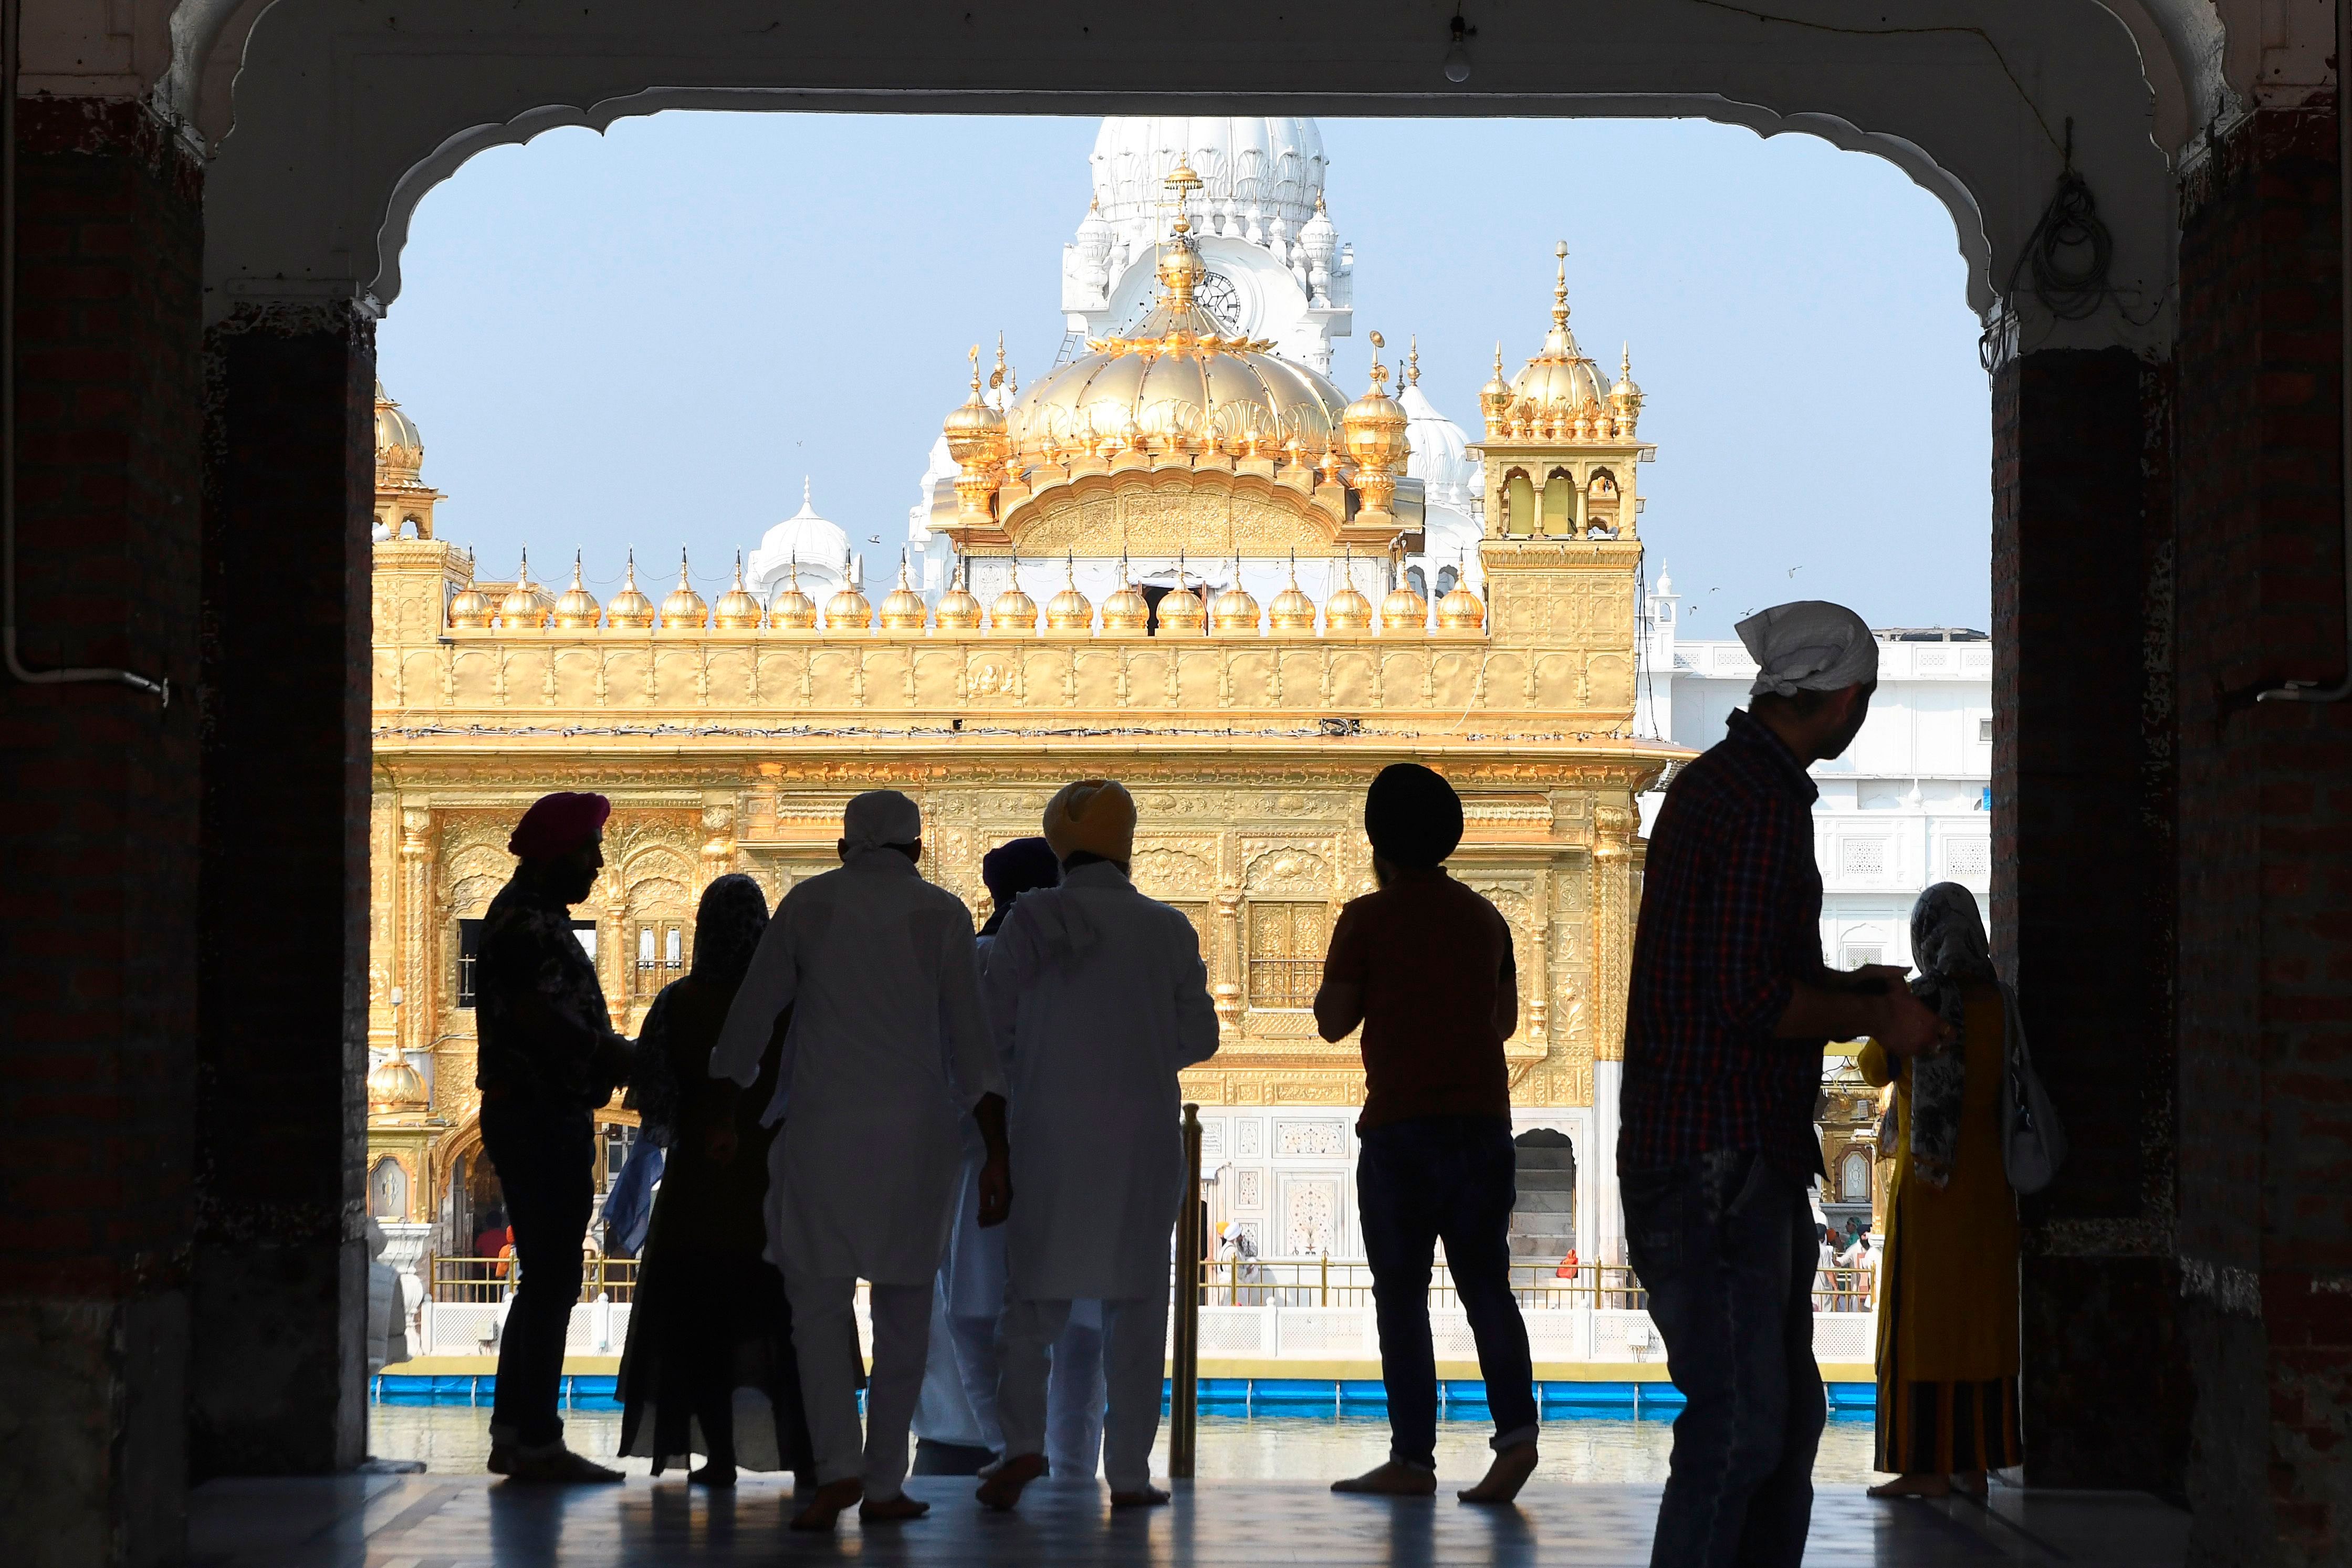 Sikh devotees arrive to pay their respect at the Golden Temple after the government eased a lockdown imposed as a preventive measure against the COVID-19 coronavirus, in Amritsar (PTI Photo)